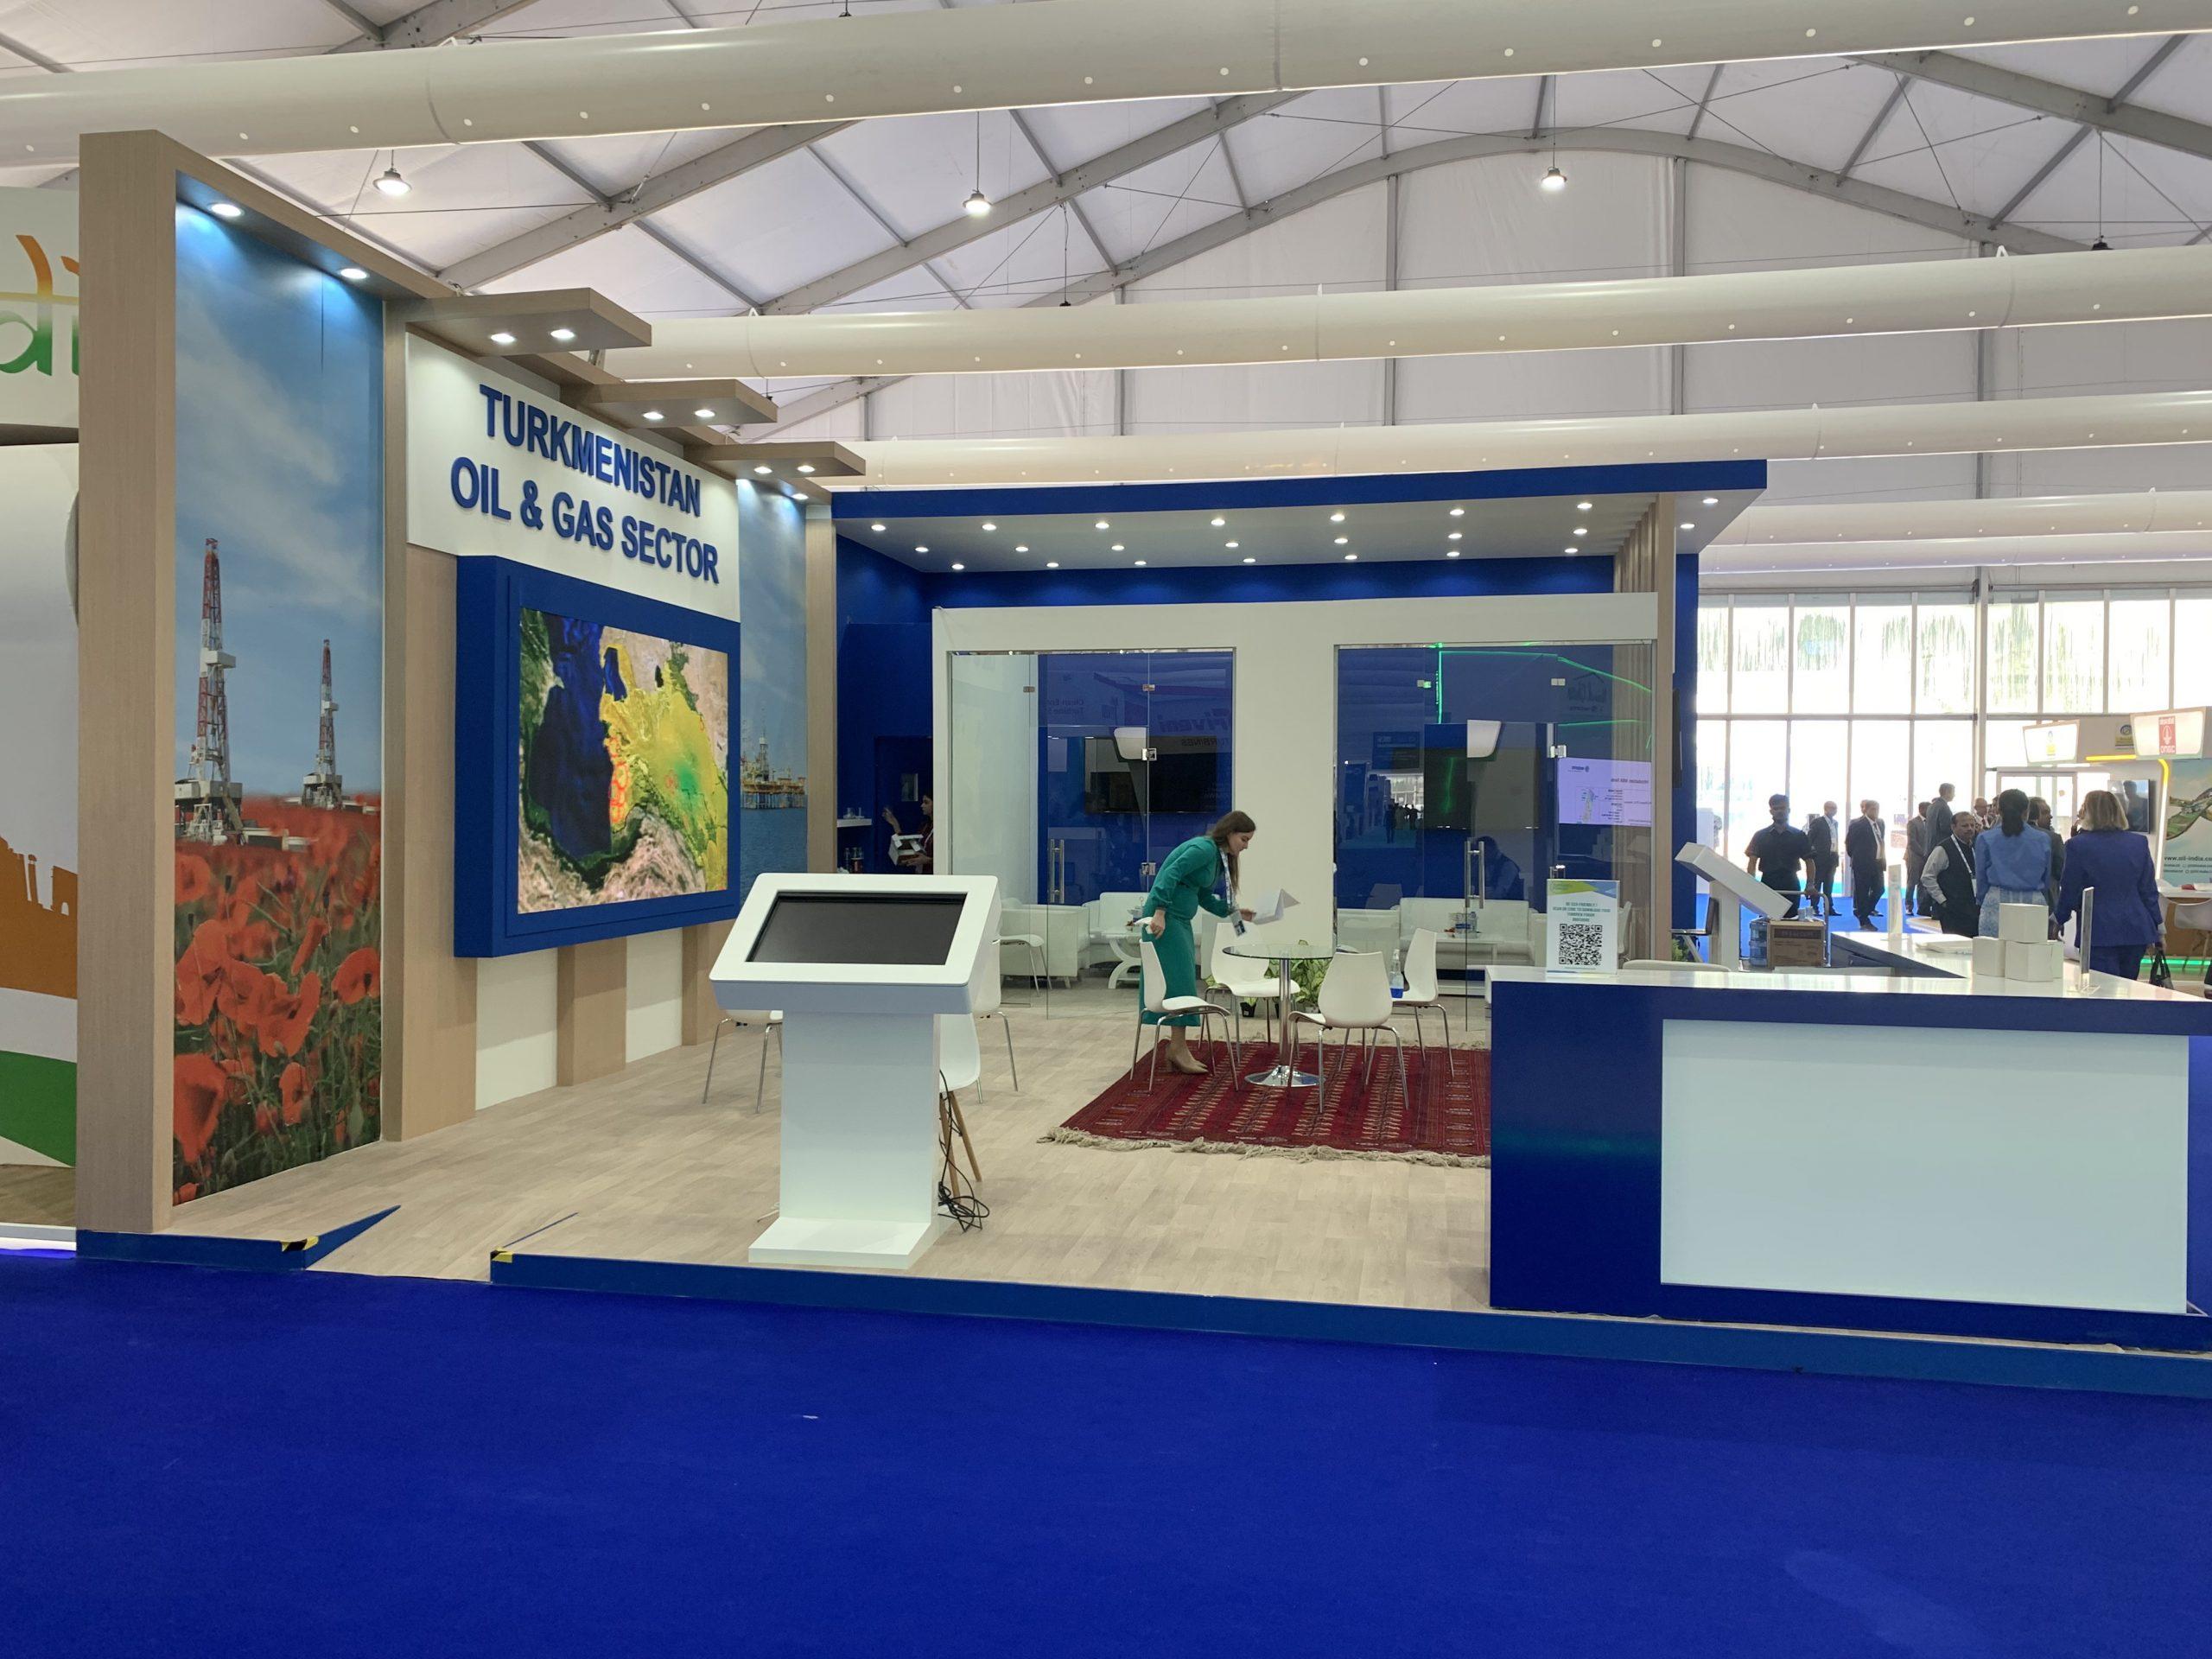 Exhibition Stand of Turkmenistan OIL at ADIPEC 2022